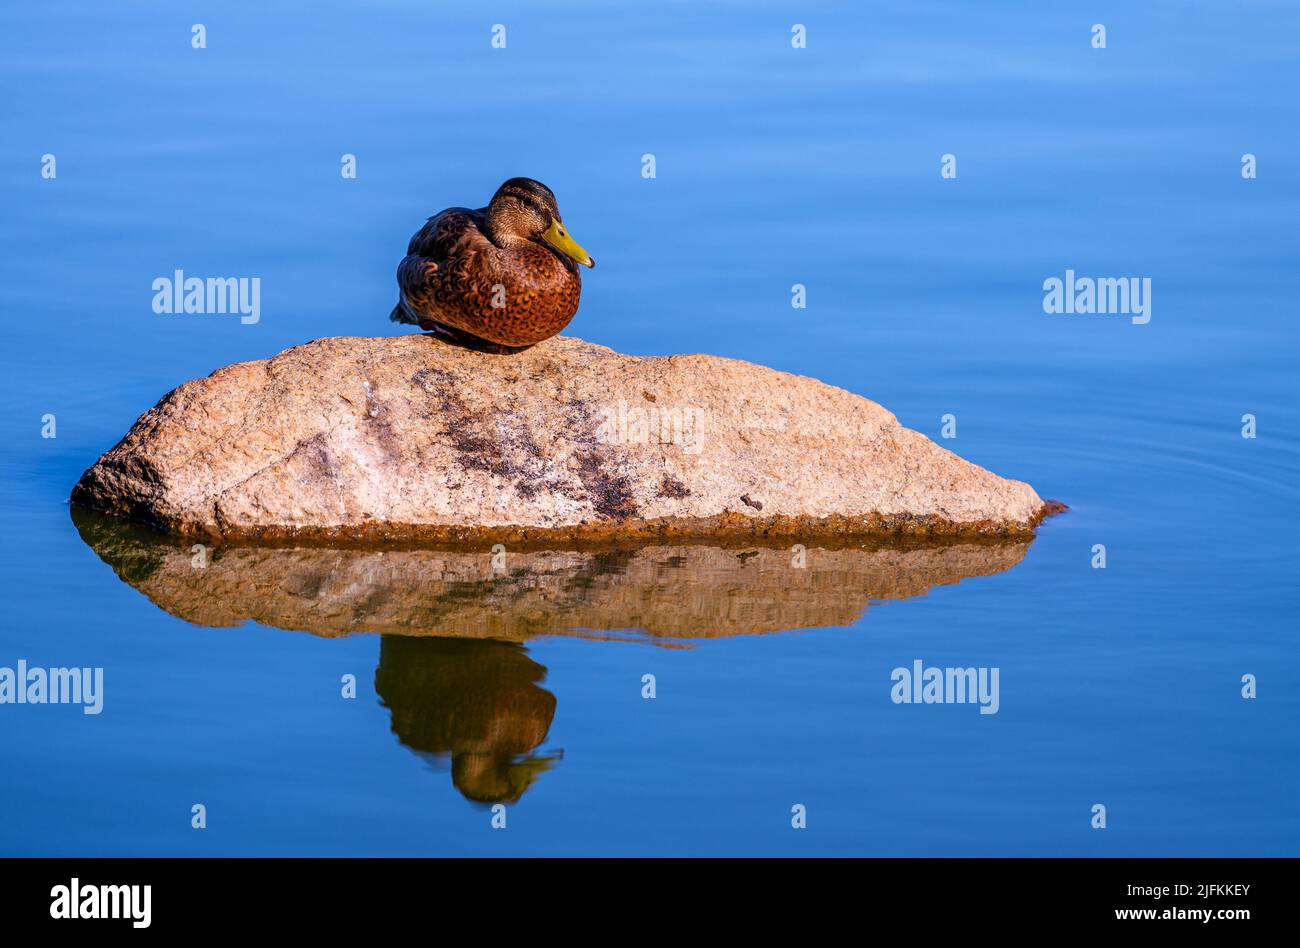 Sunset light makes a beautiful reflection image of a young adult female Mallard duck sitting on a rock one foot. British Columbia, Canada. Stock Photo